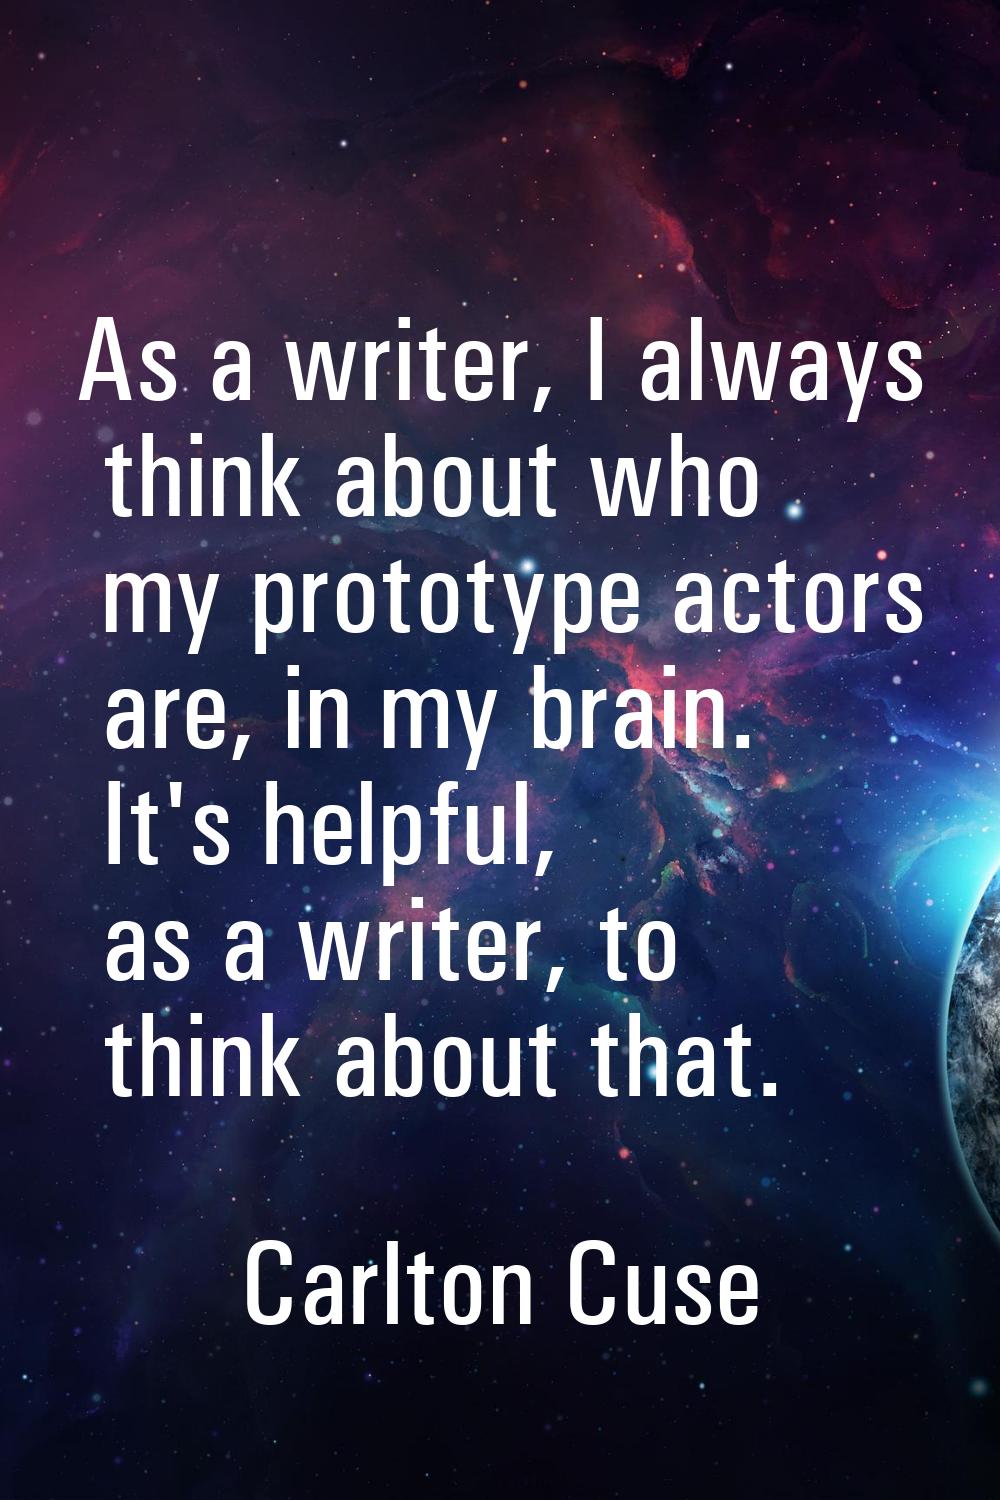 As a writer, I always think about who my prototype actors are, in my brain. It's helpful, as a writ